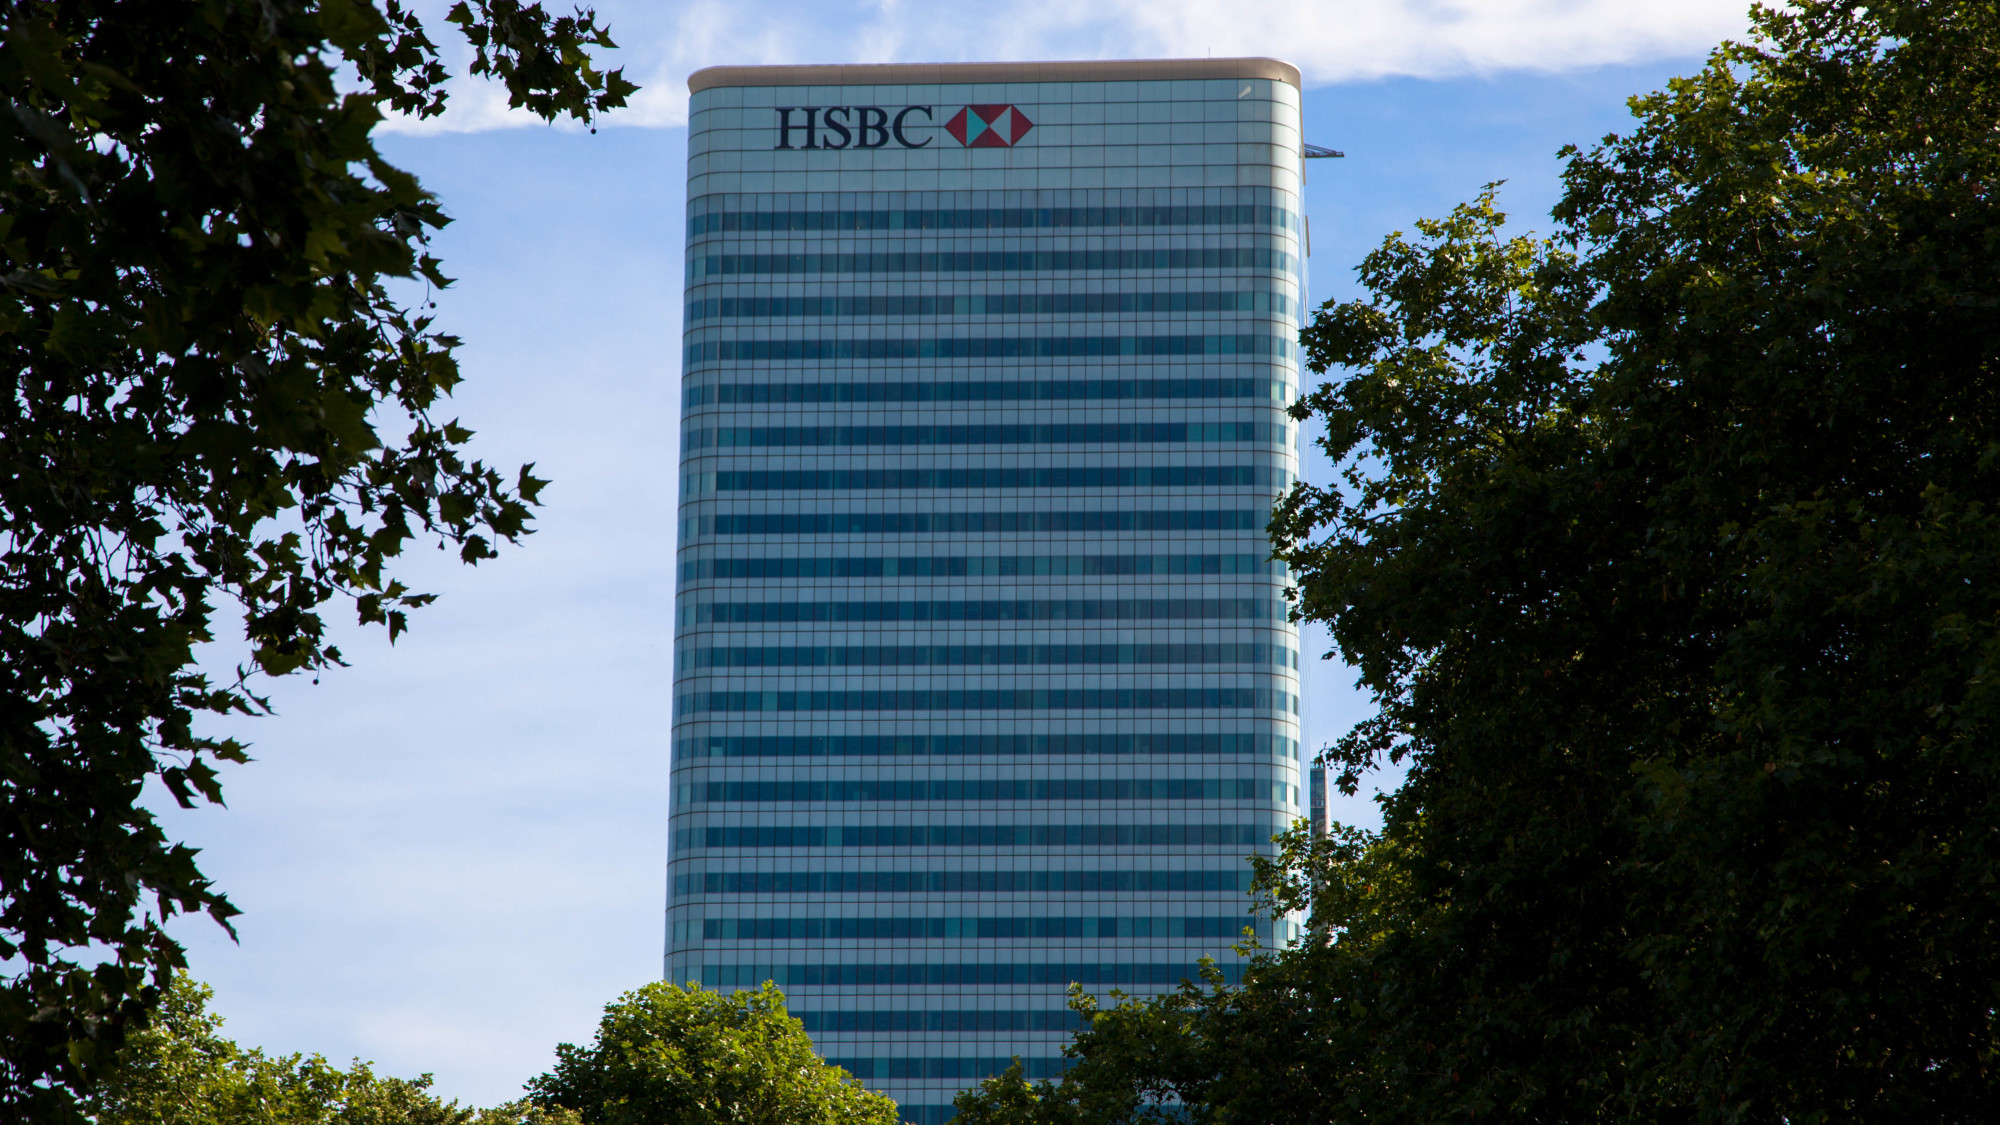 Flexible Working Policies As Important as Salary, Says HSBC